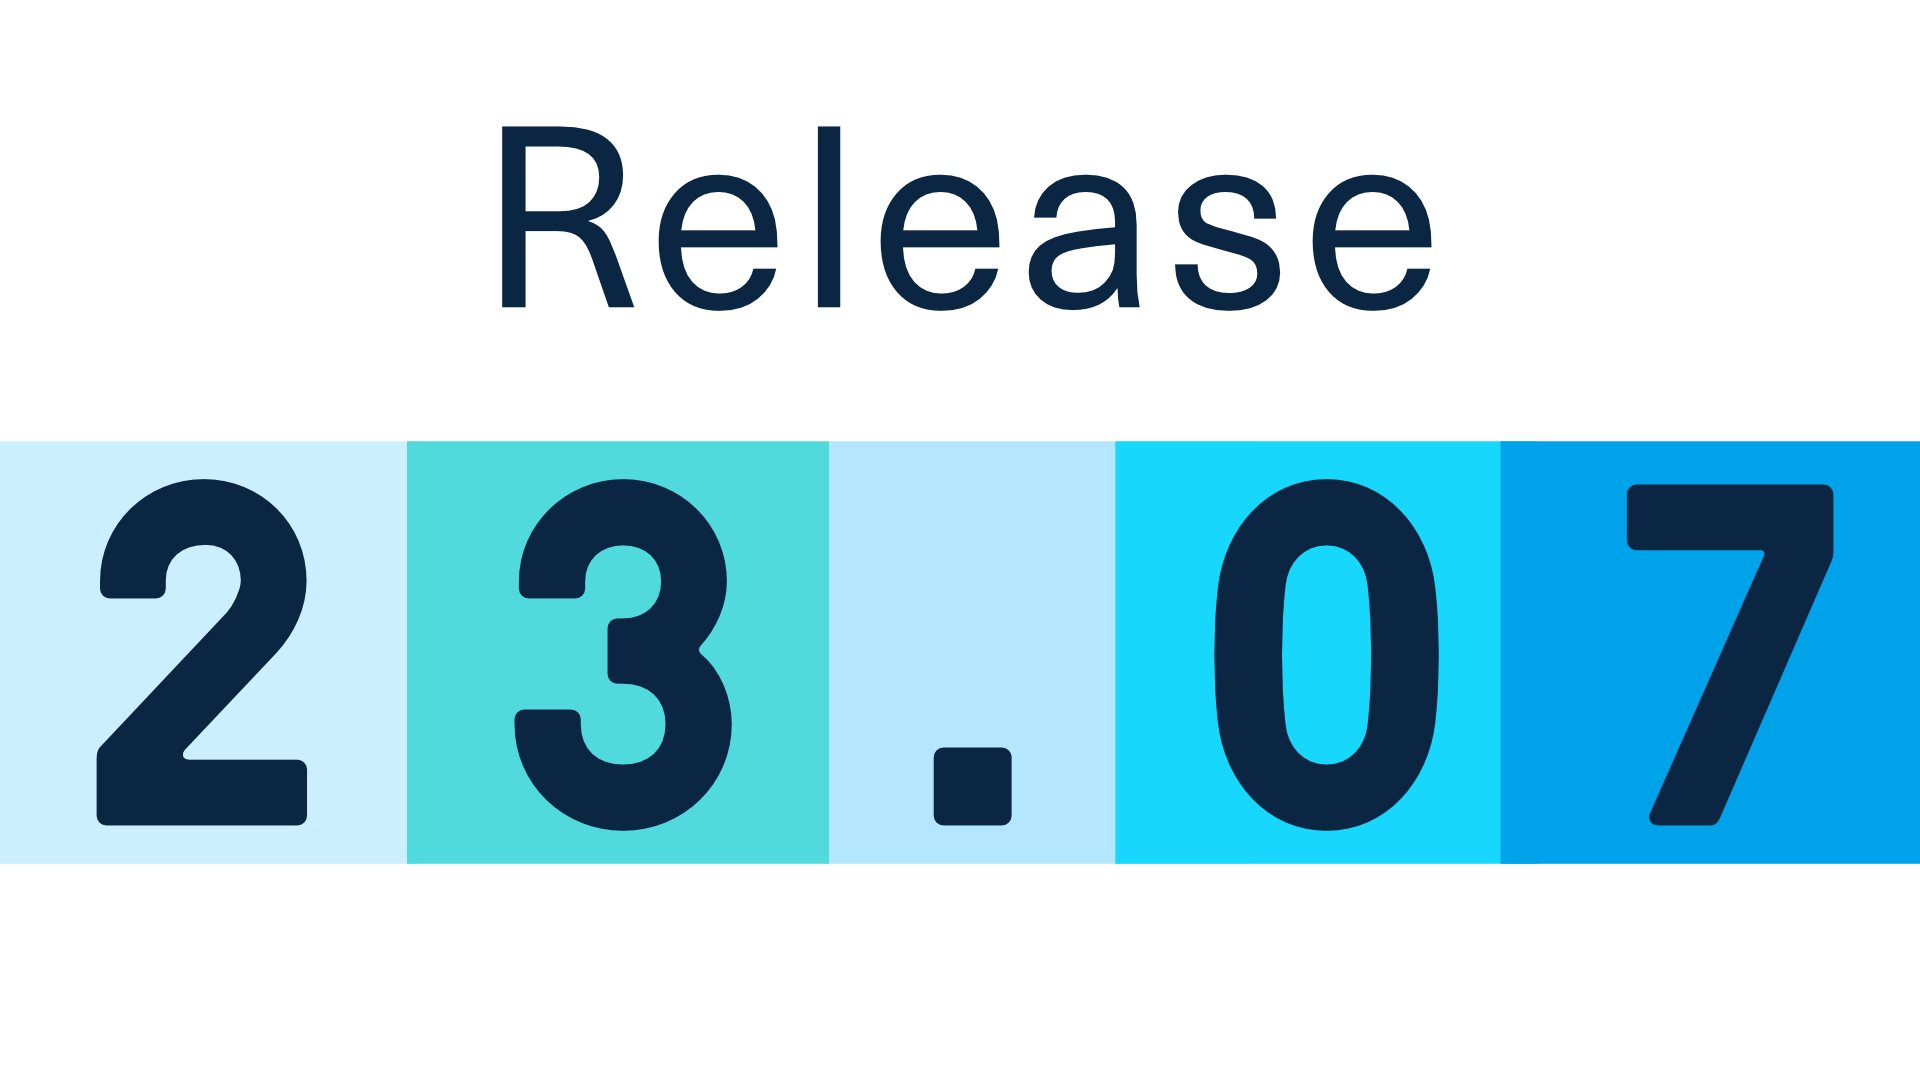 Release 23.07